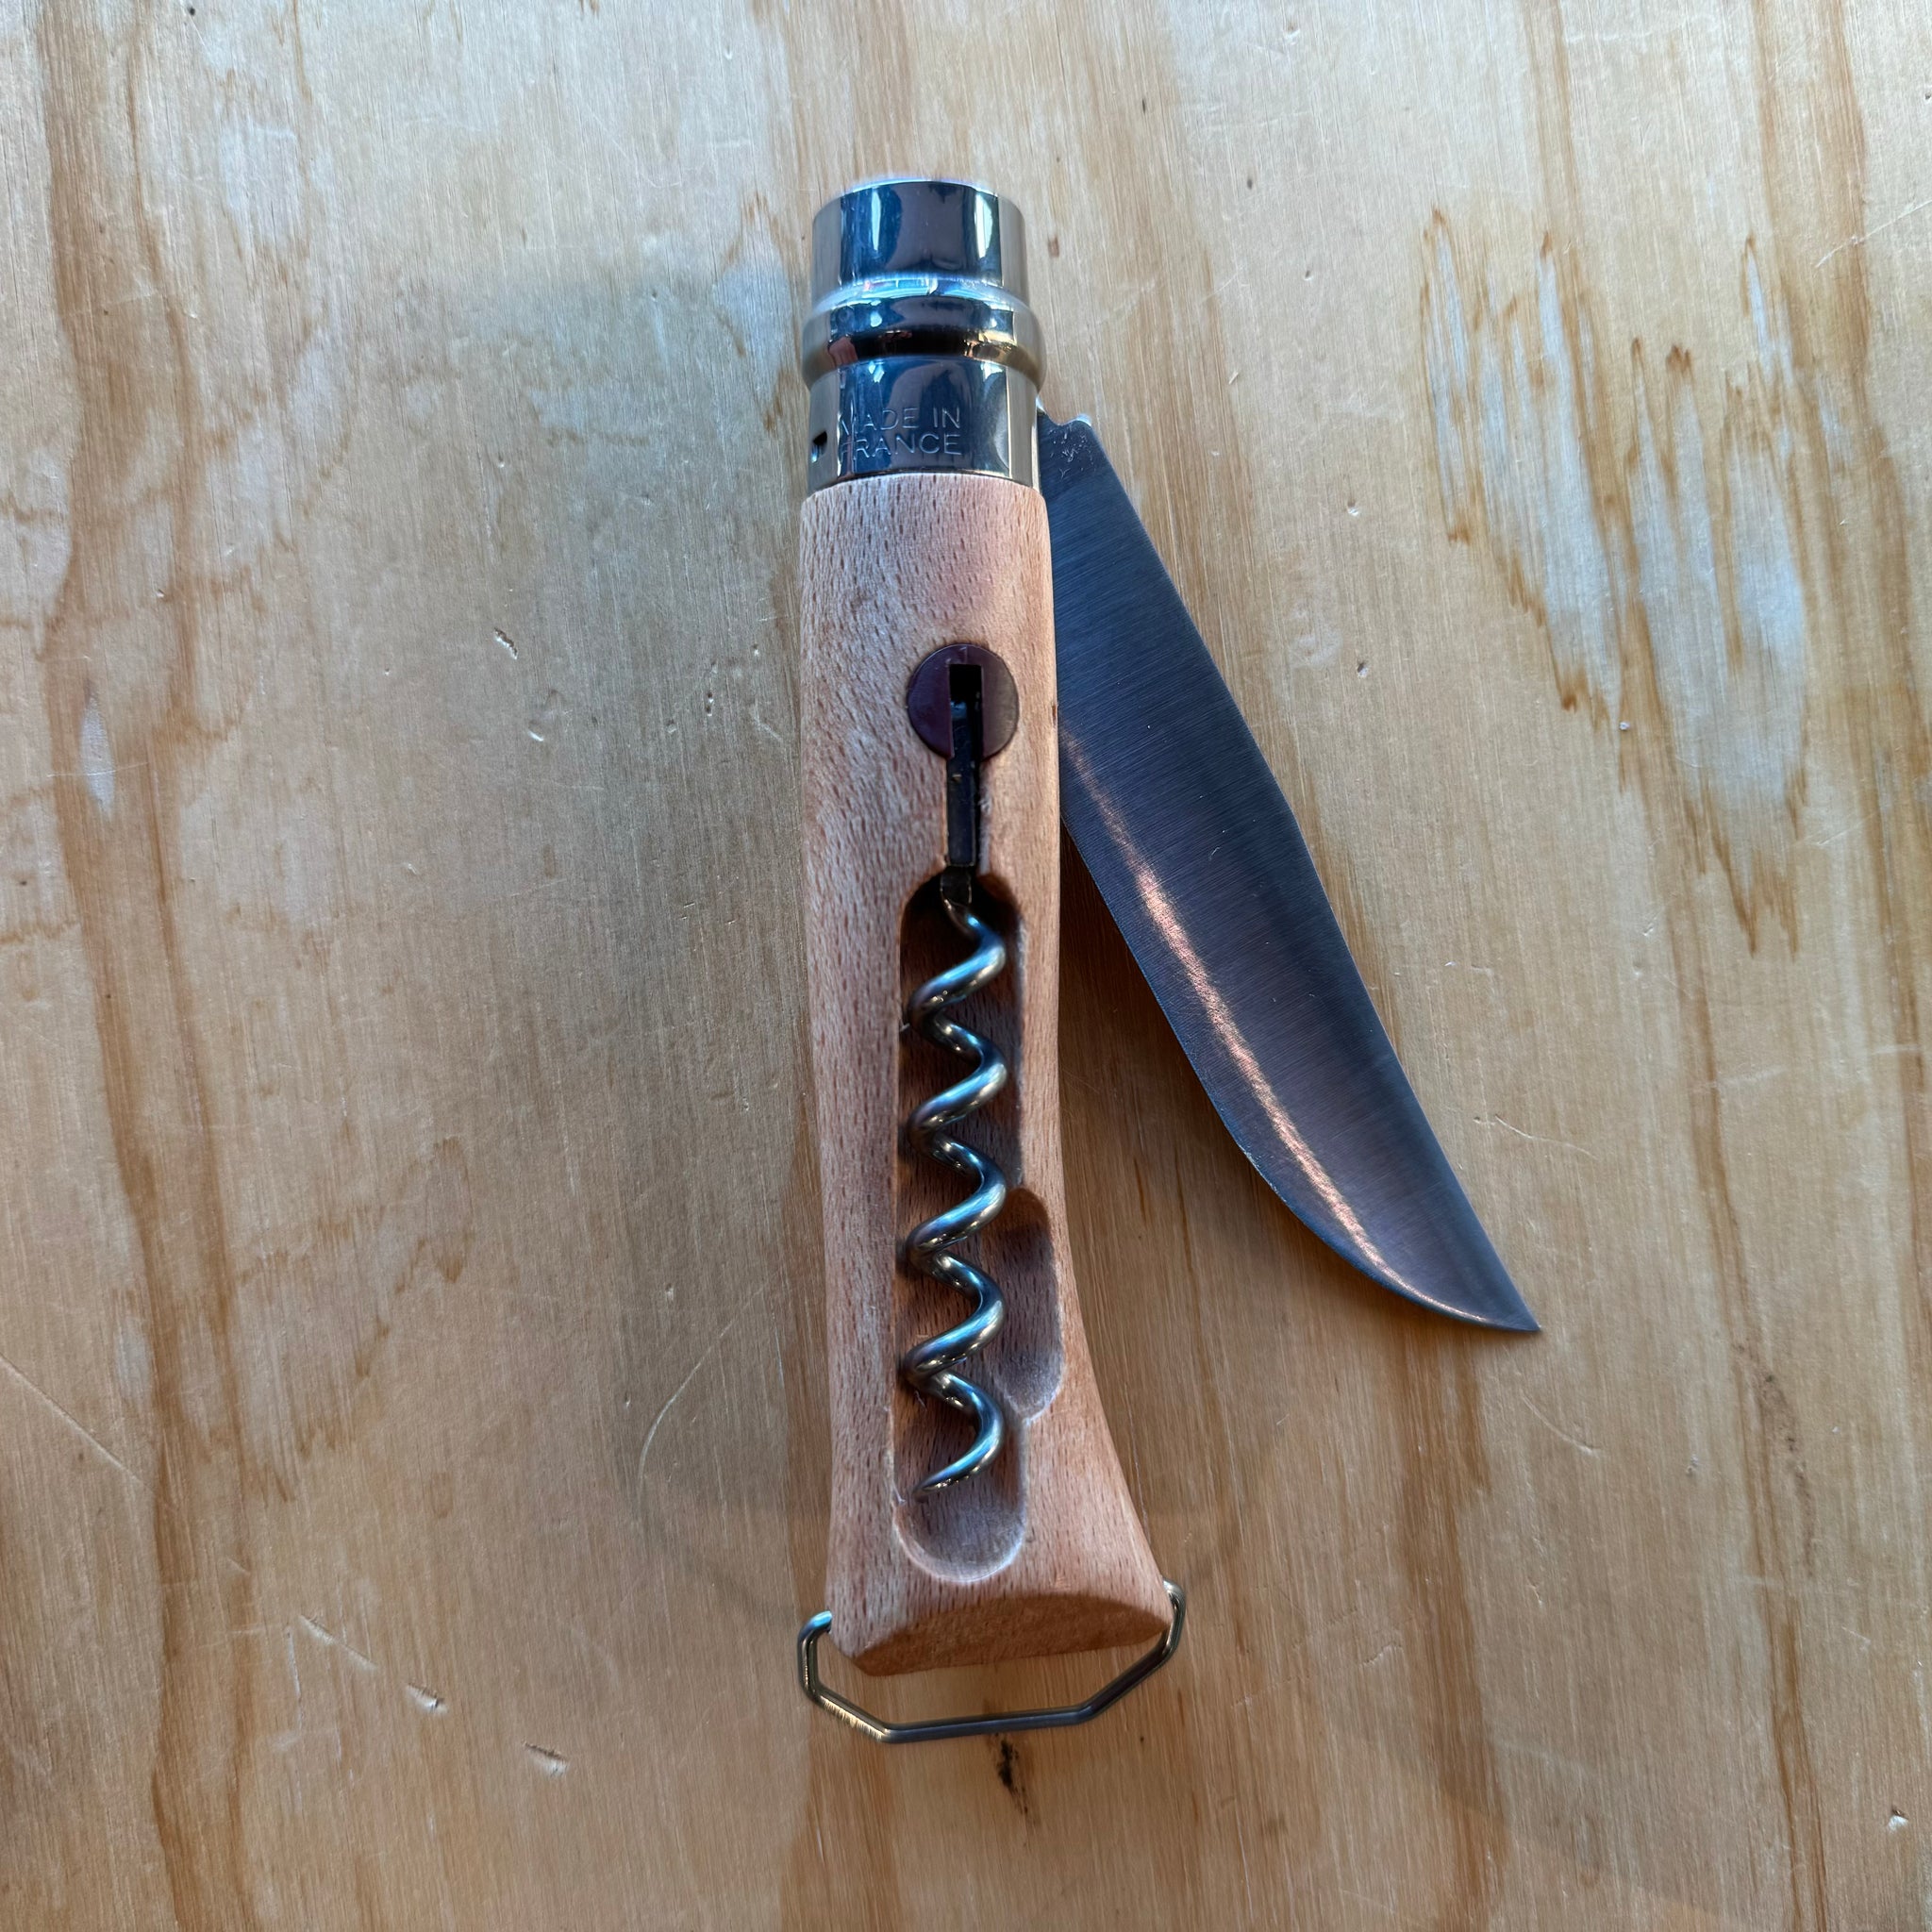 Opinel No. 10 Knife and Corkscrew